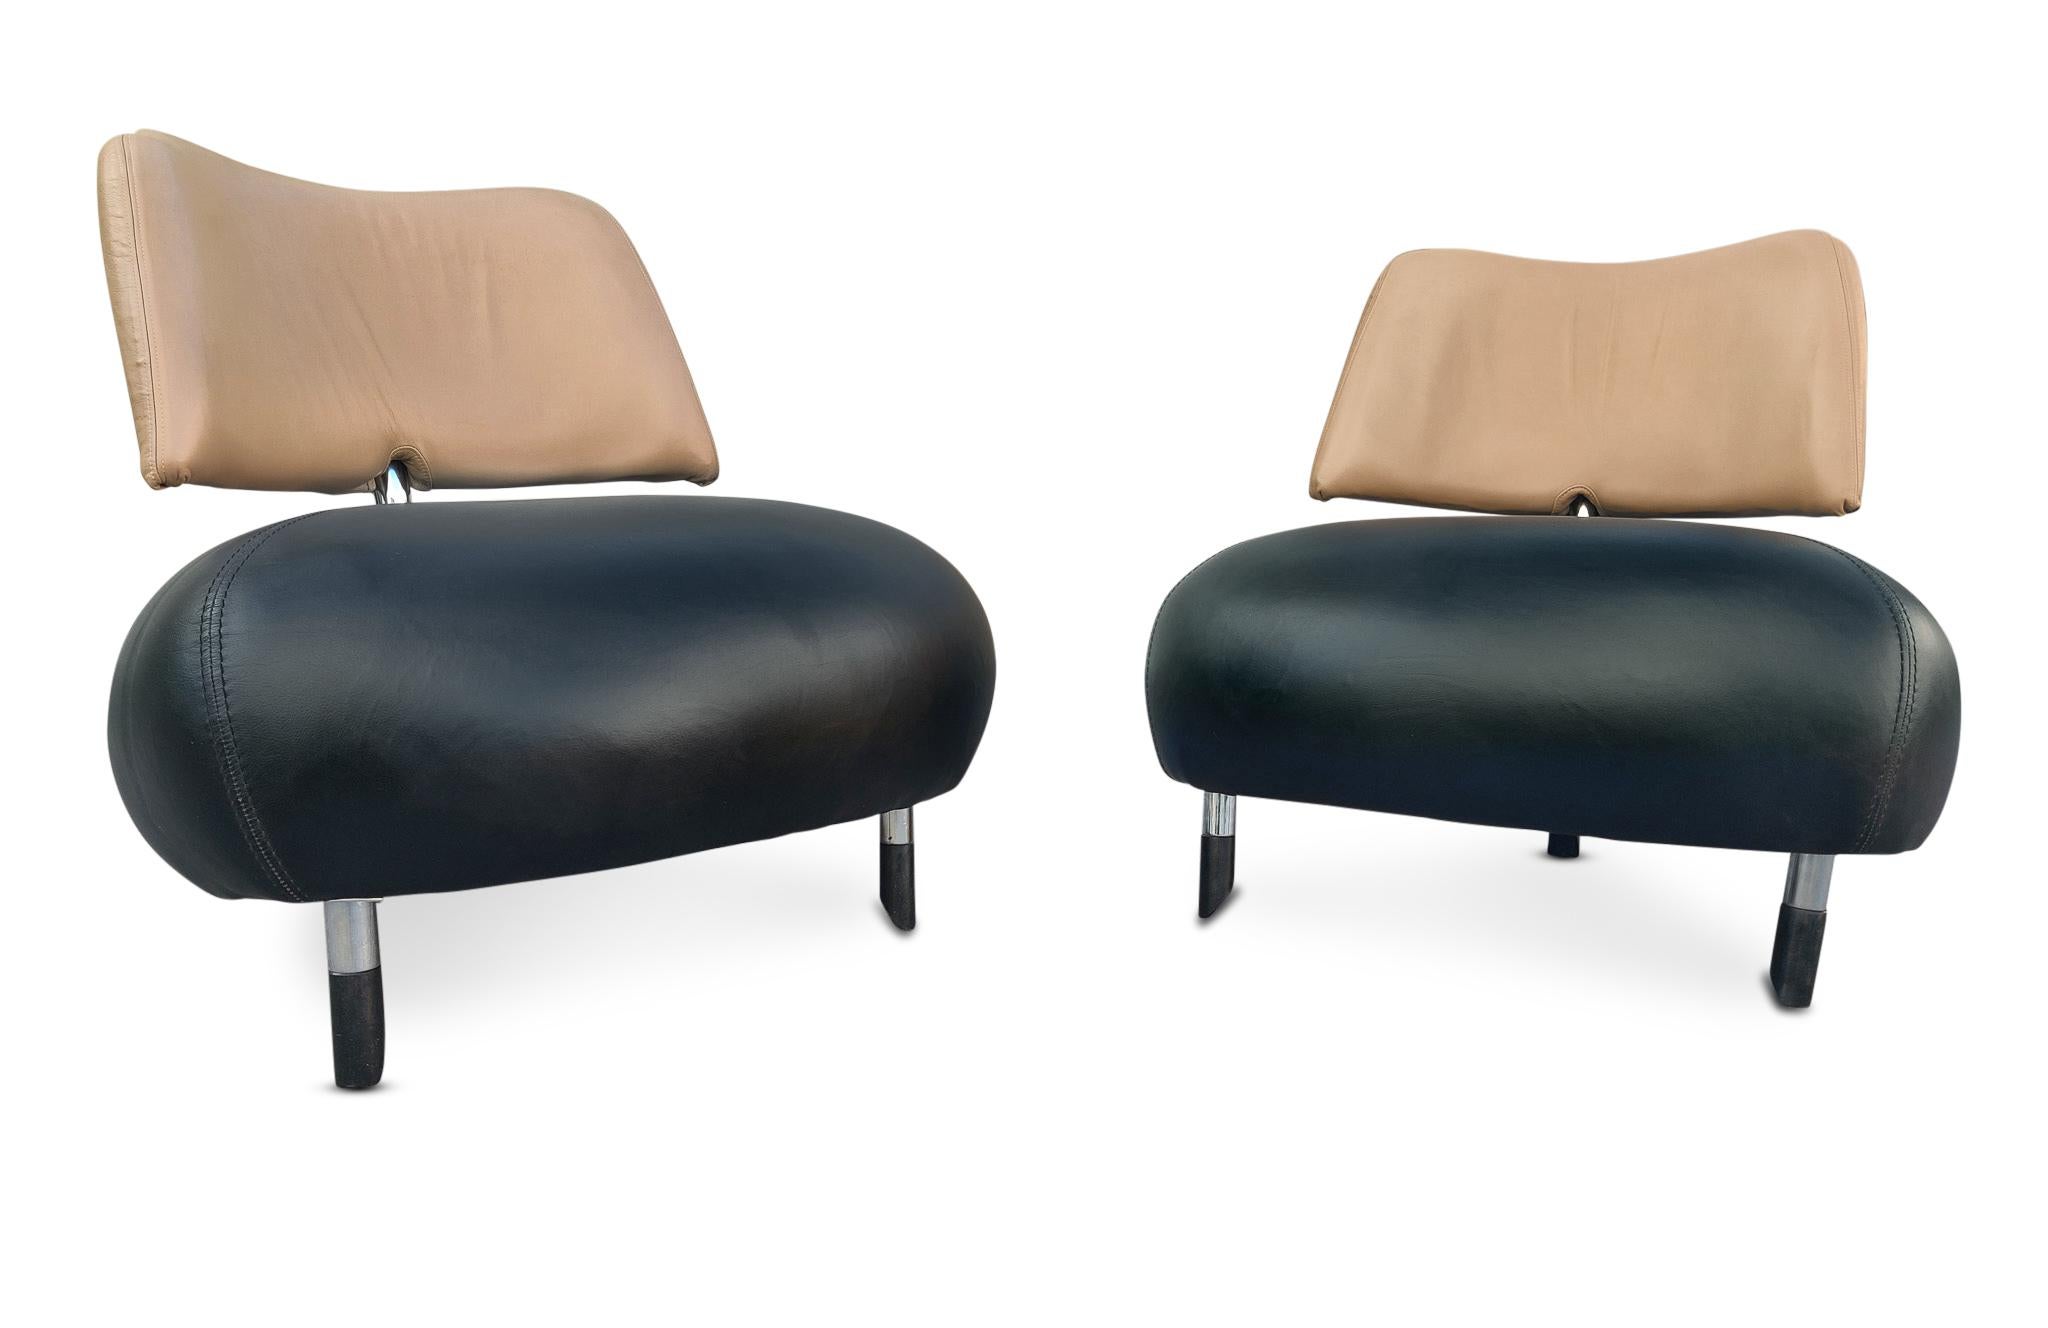 Late 20th Century Pallone Leather Lounge Chairs Pair, by Roy de Scheemaker for Leolux, Post-Modern